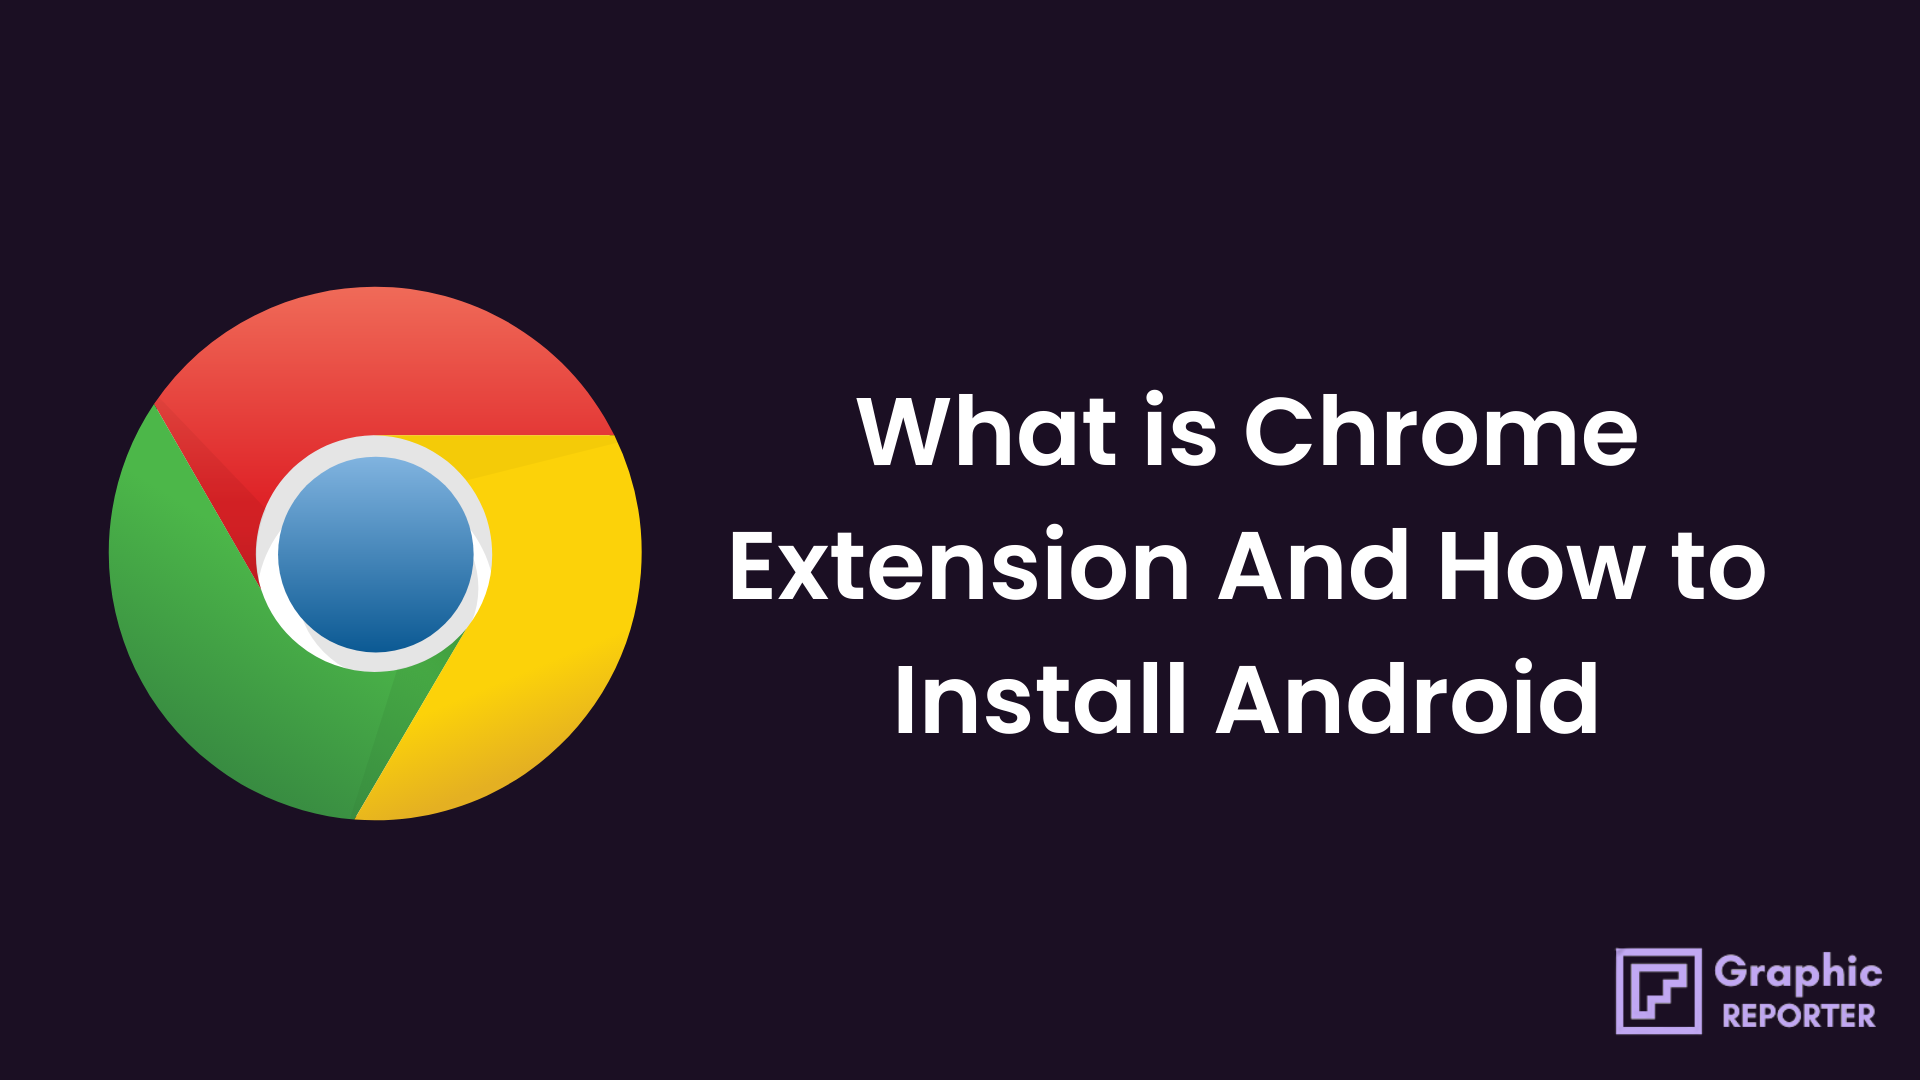 What is Chrome Extension And How to Install And Use Chrome Extension In Android